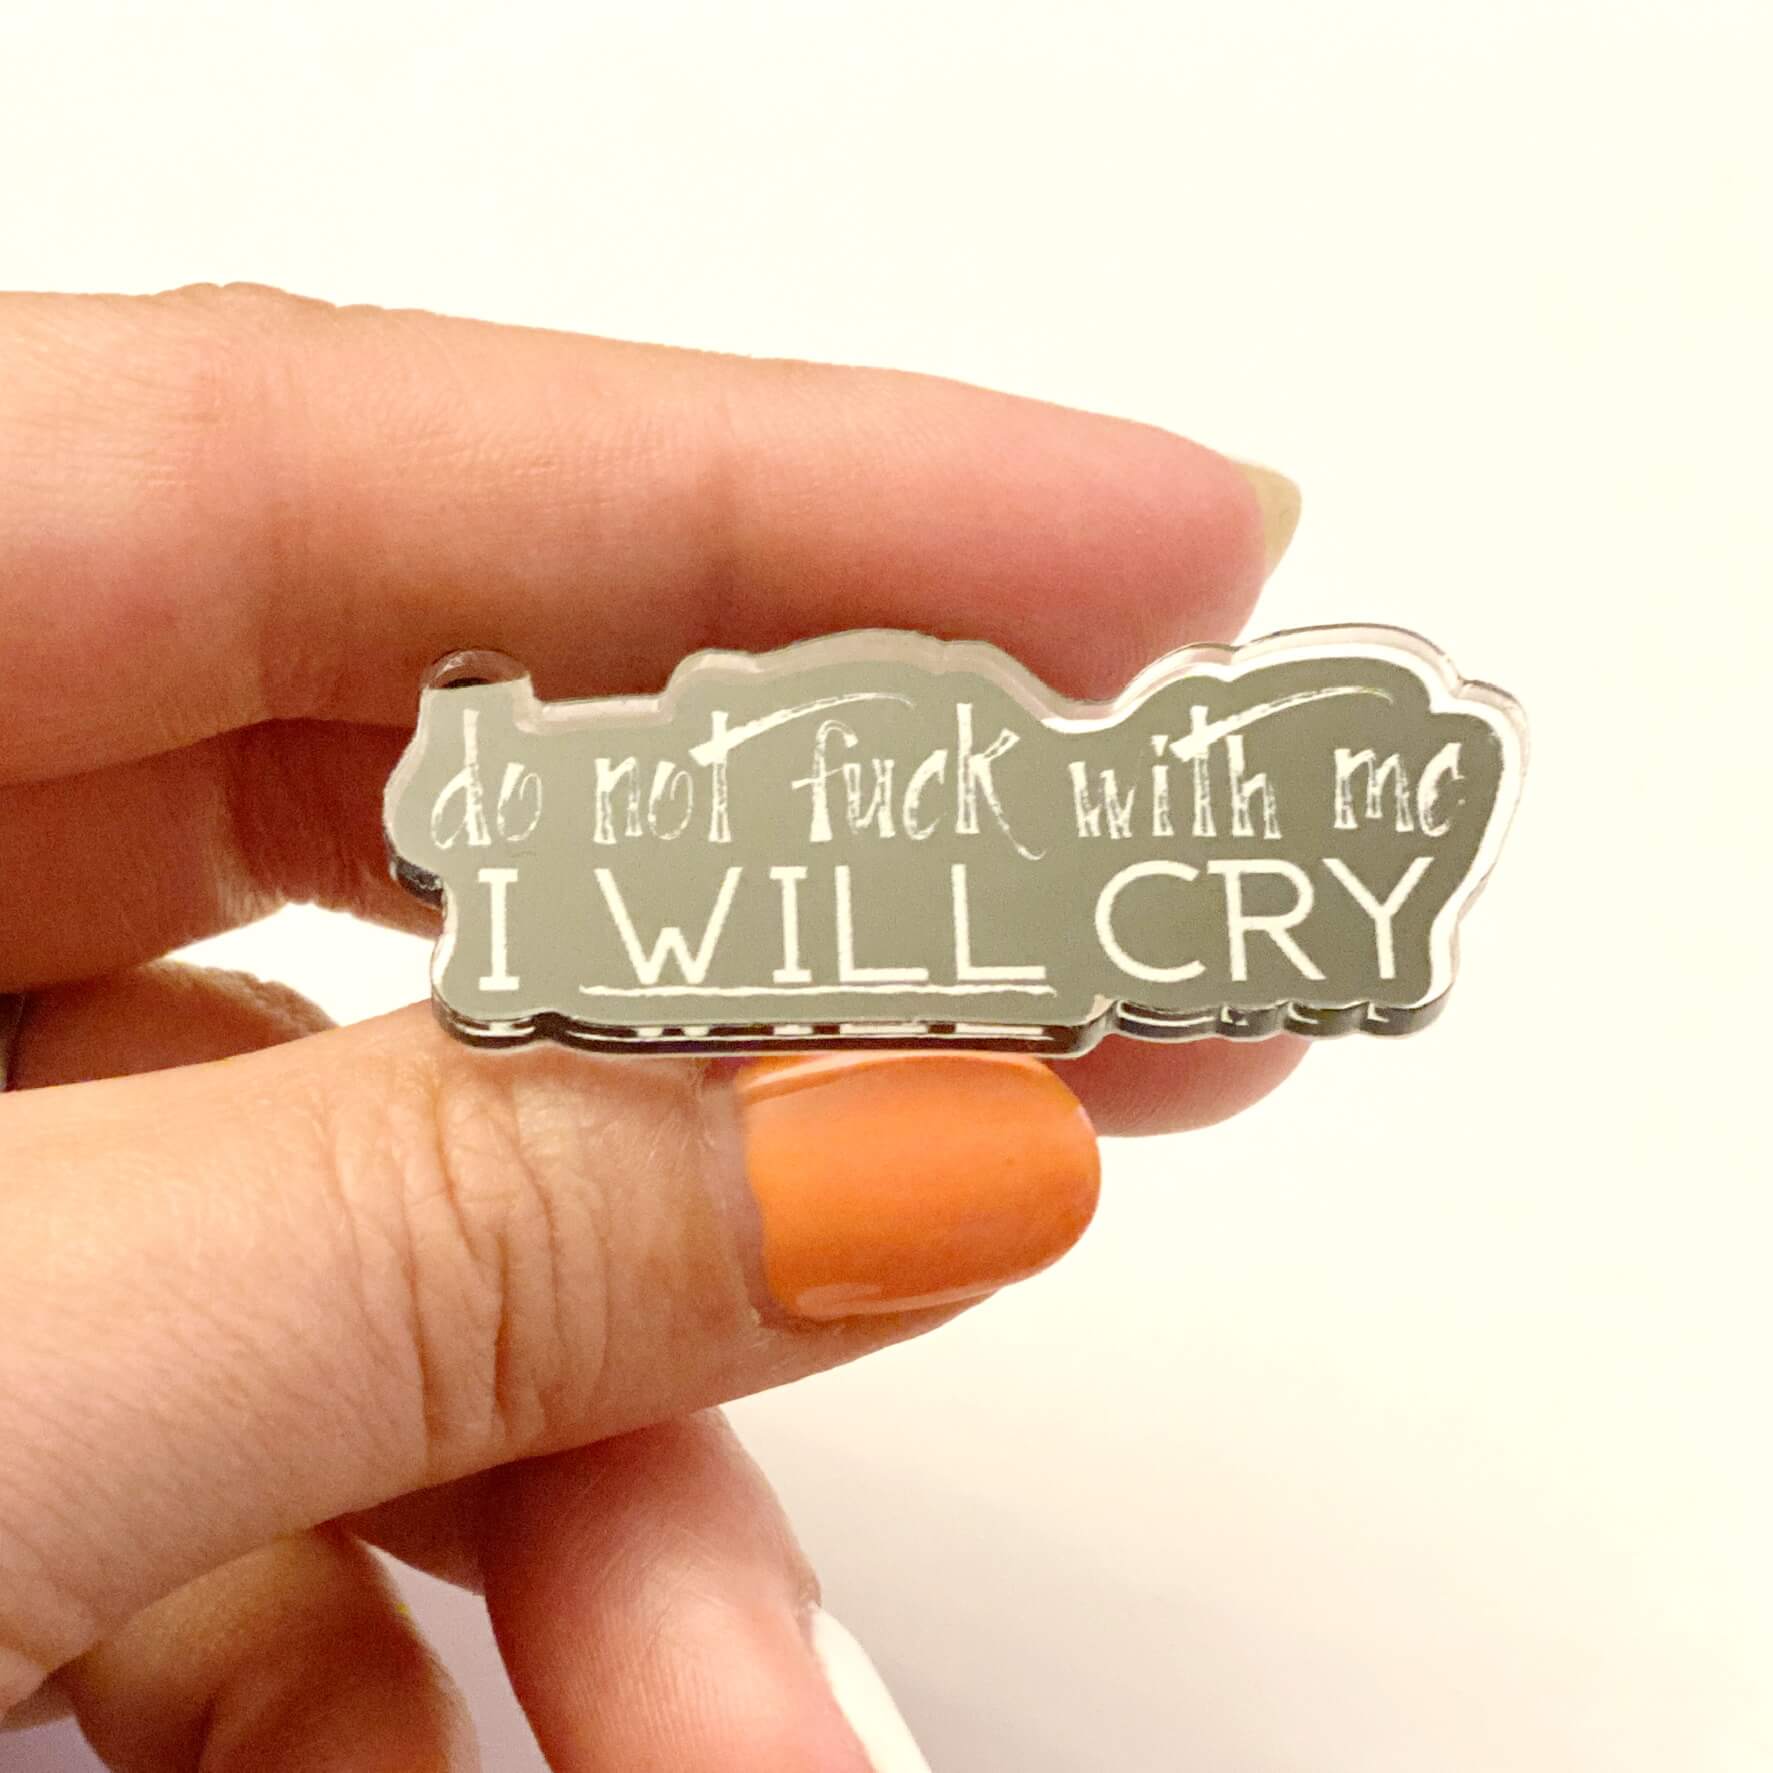 Close up of fingers holding an I will cry pin